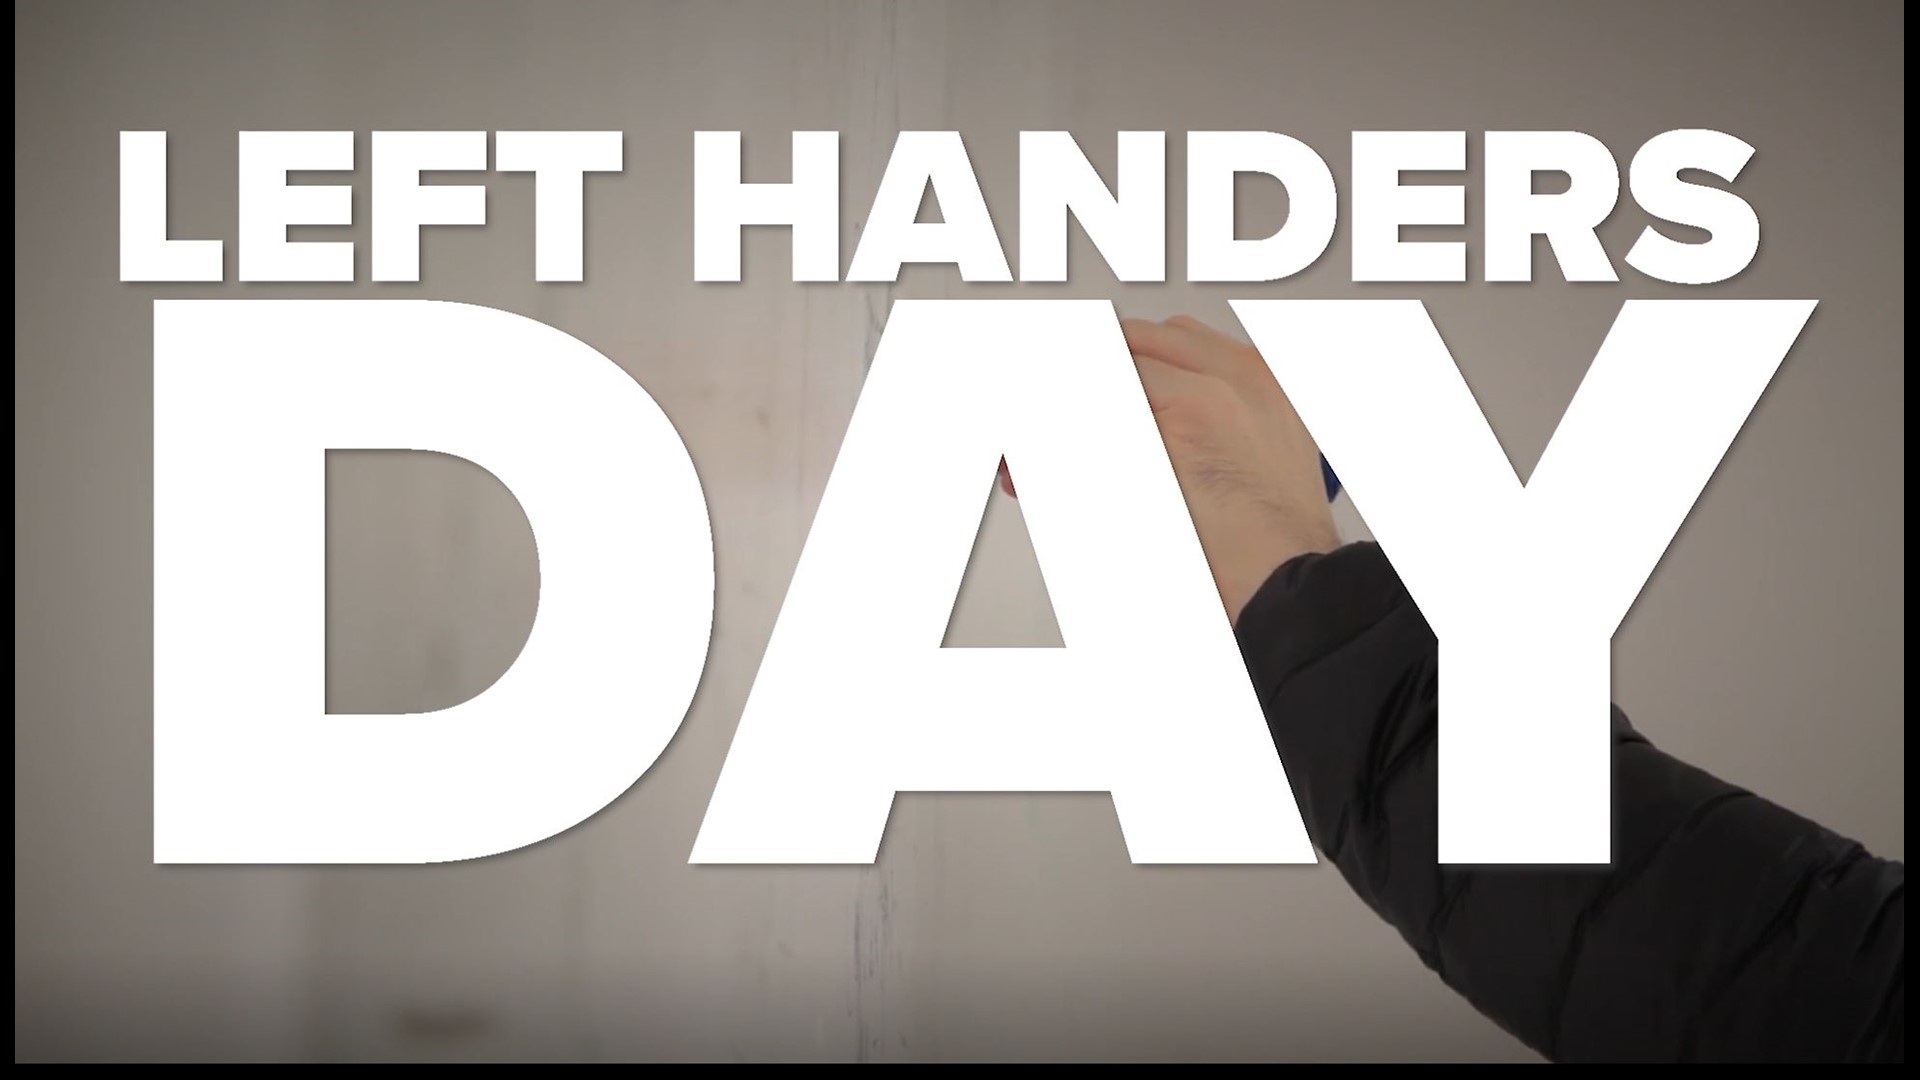 LeftHanders Day is Aug. 13! Here are 10 facts all about lefties